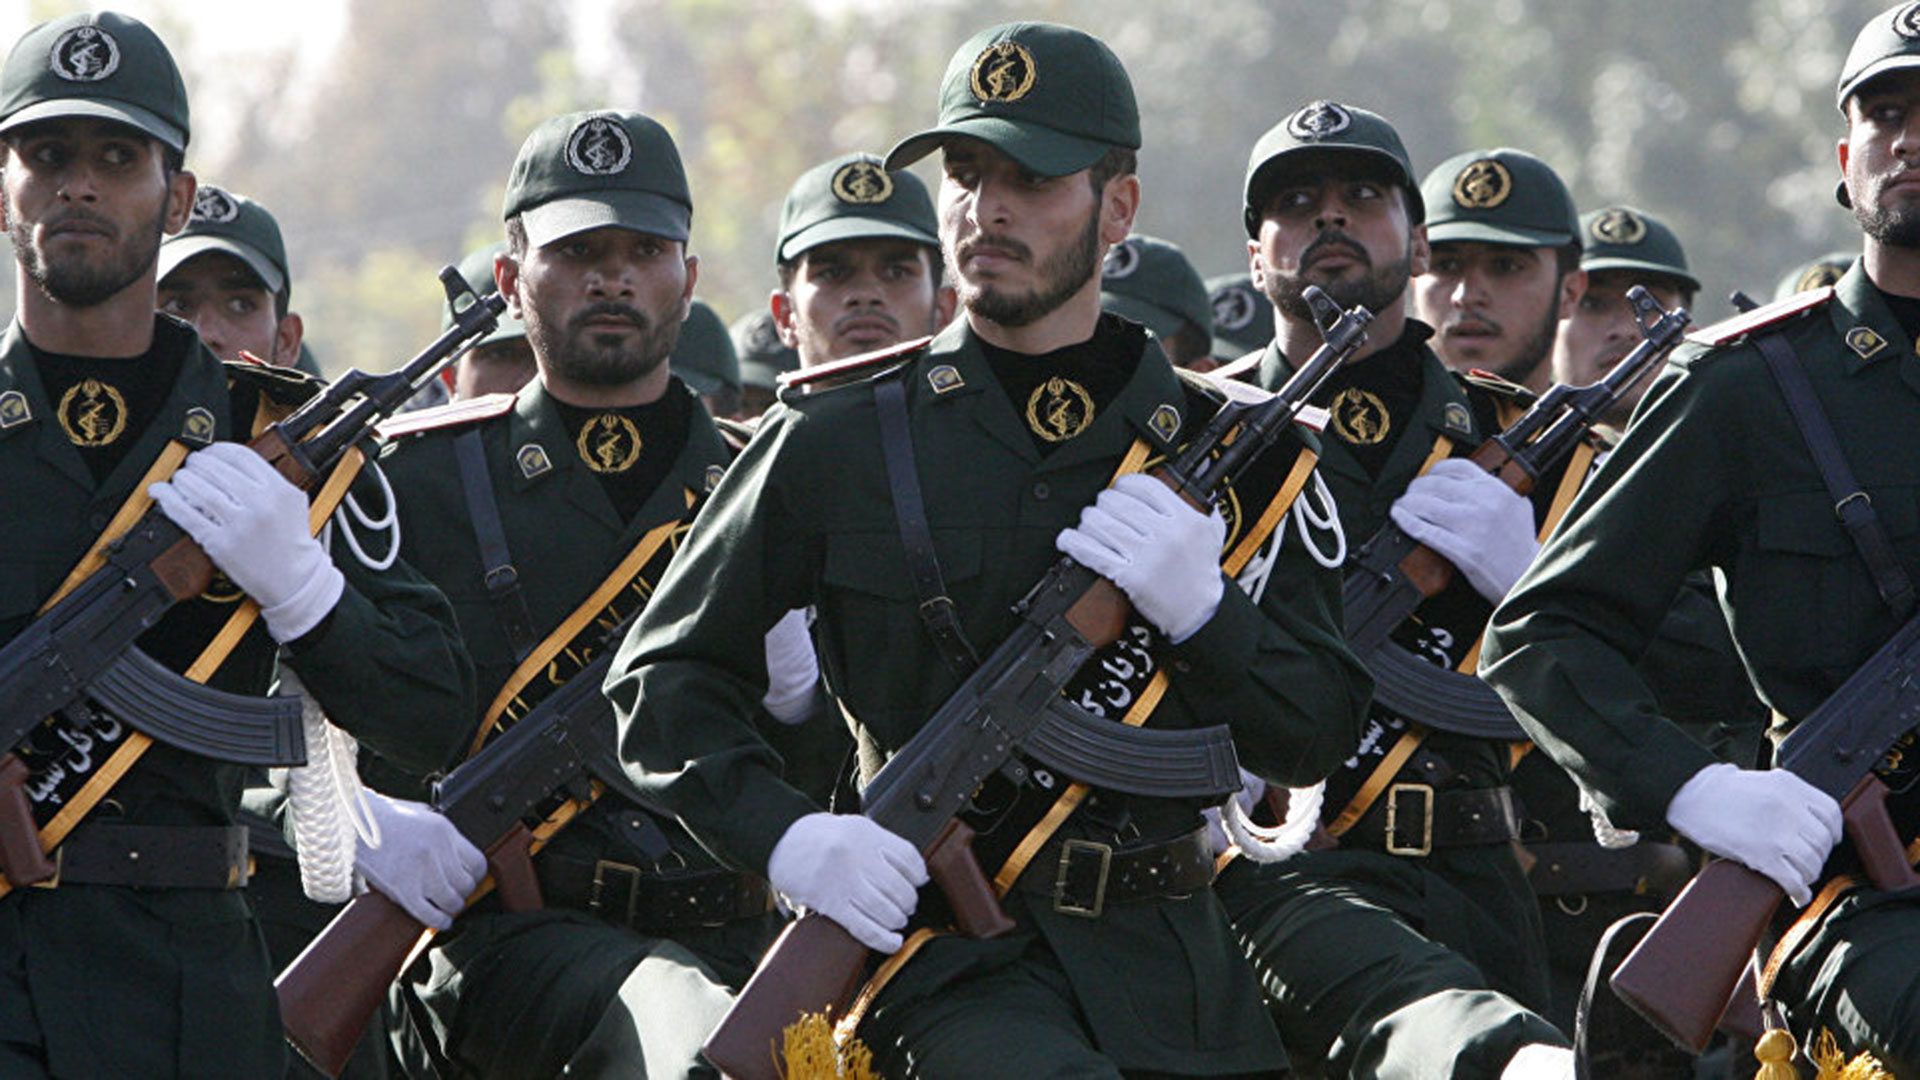 The Revolutionary Guard, the elite body of the Iranian army